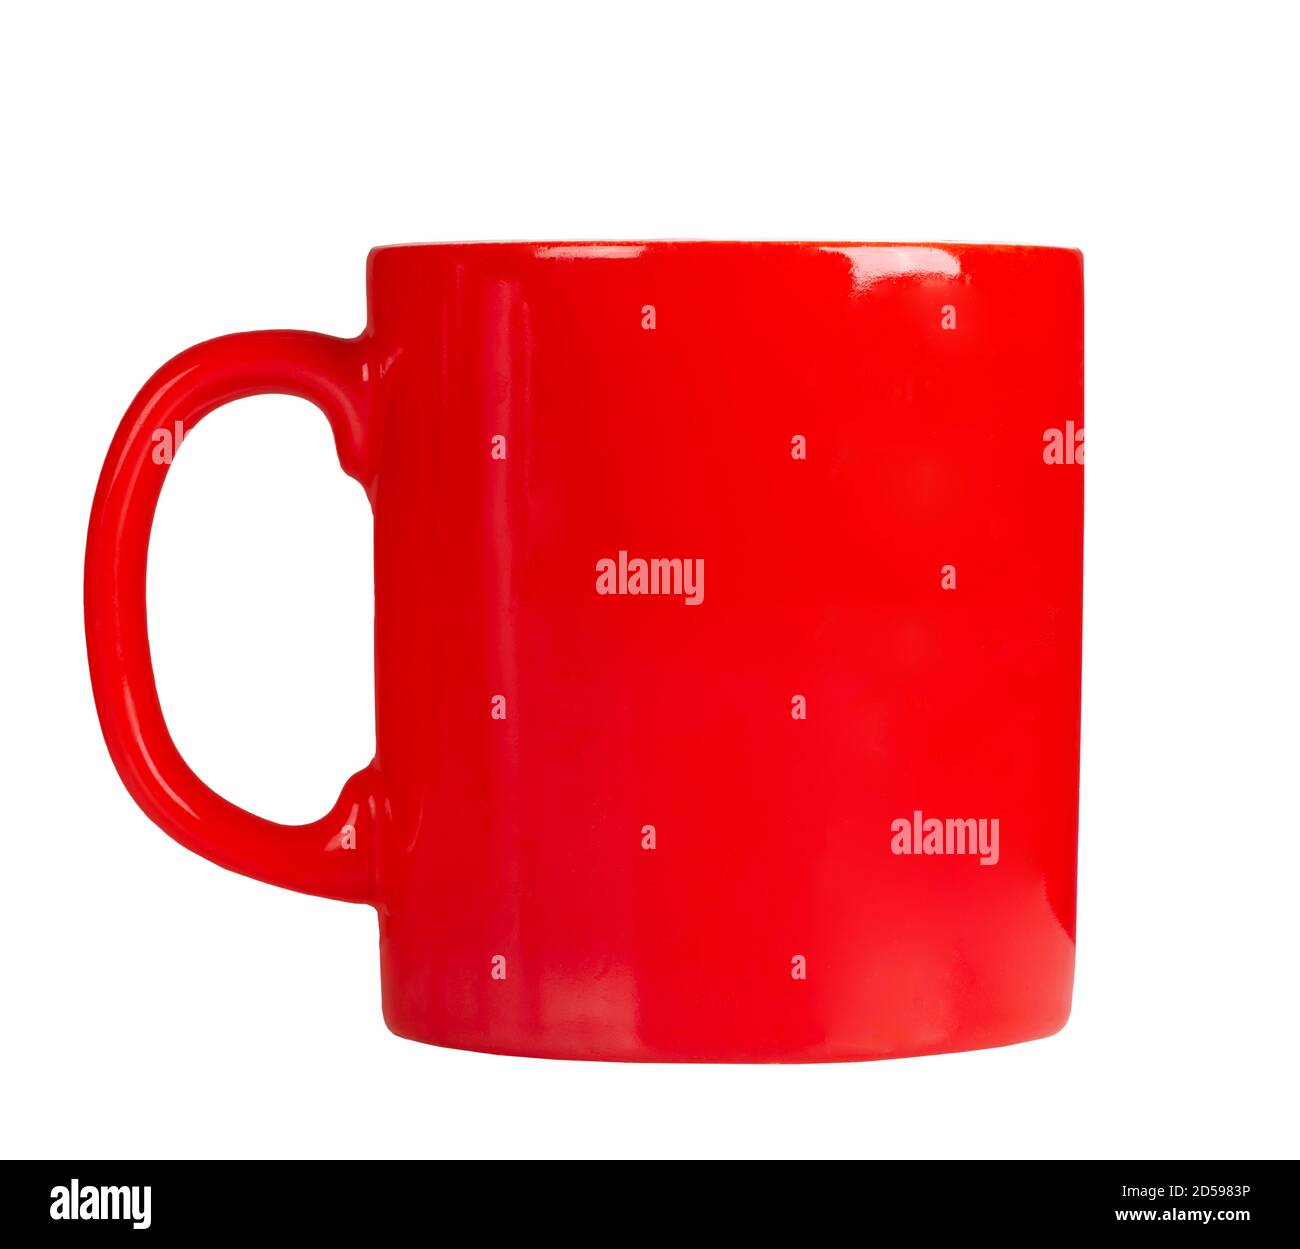 A bright red coffee or tea mug, isolated on a white background. Stock Photo